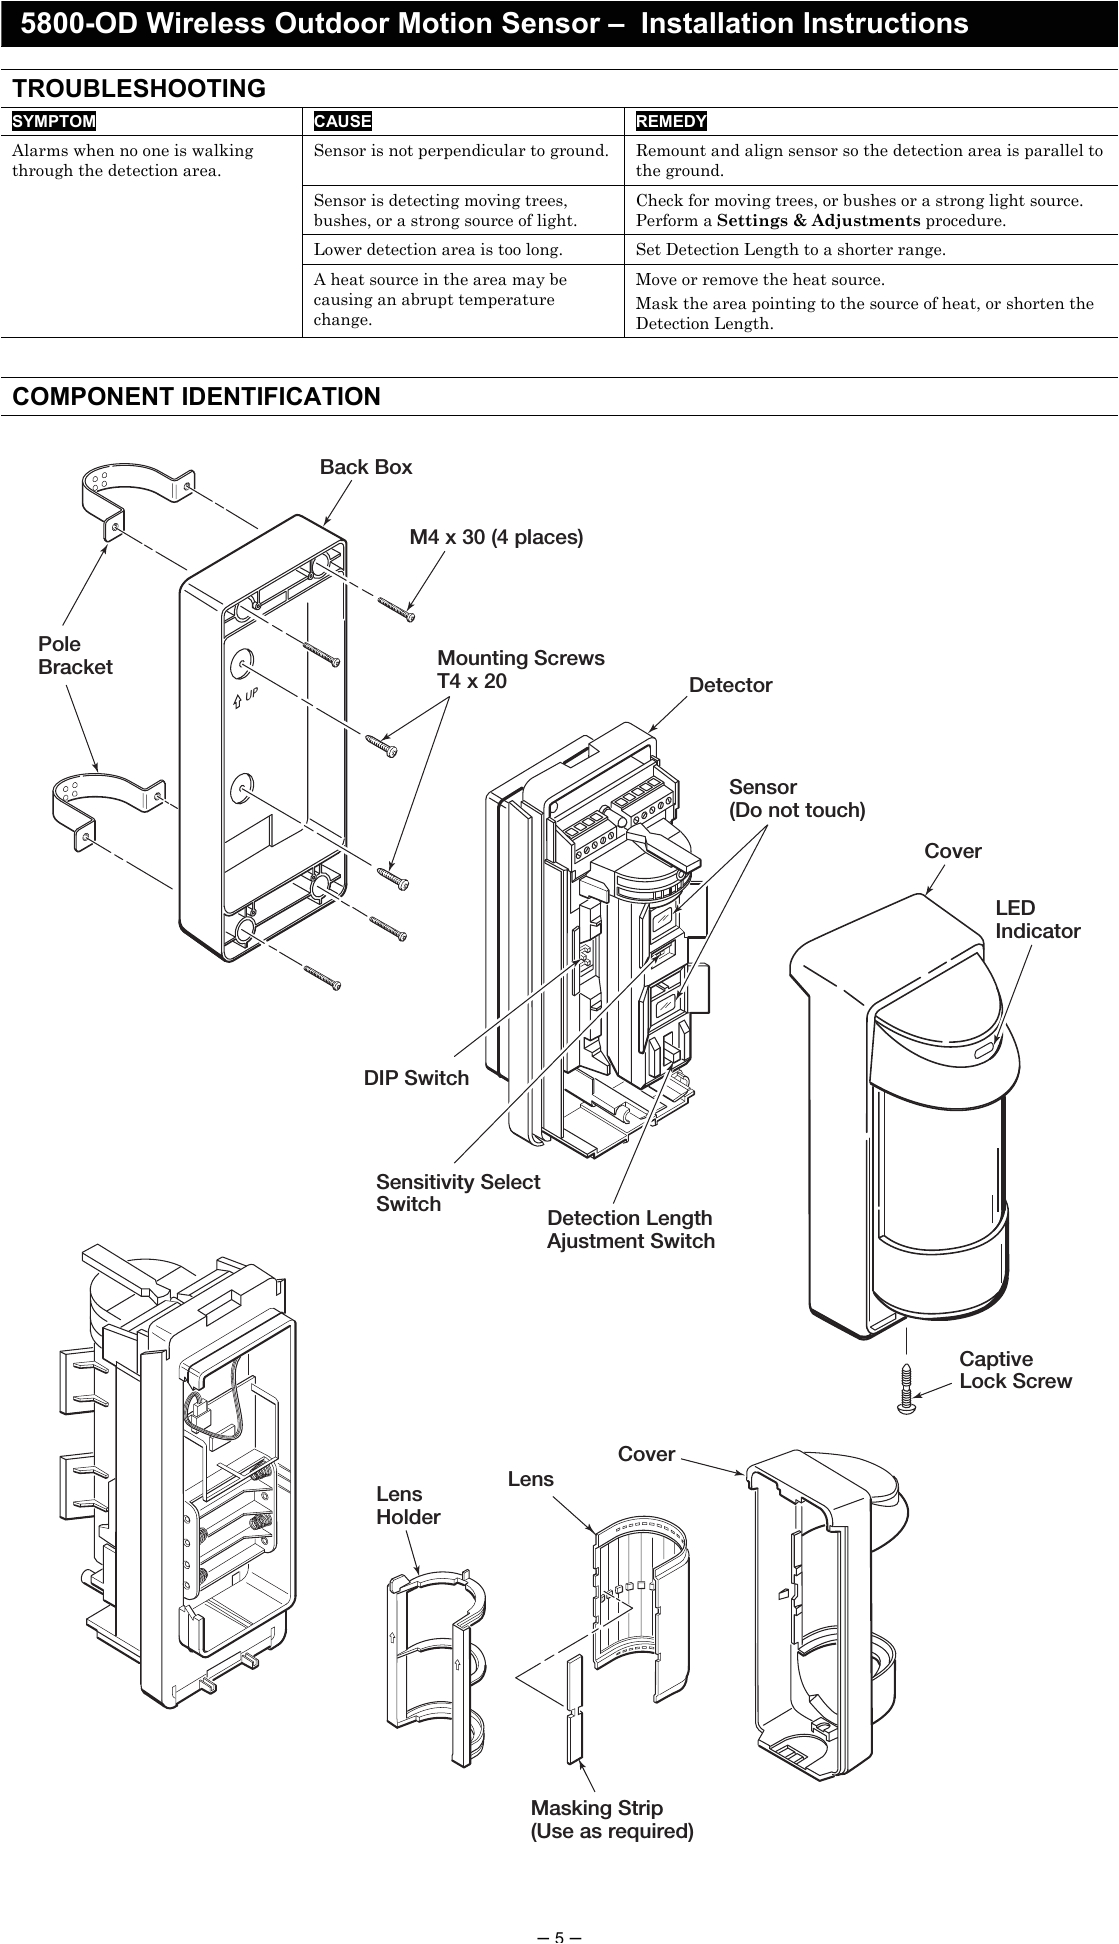 page 5 of 8dl5800pir od security transmitter user manual 5890 od wireless outdoor motion